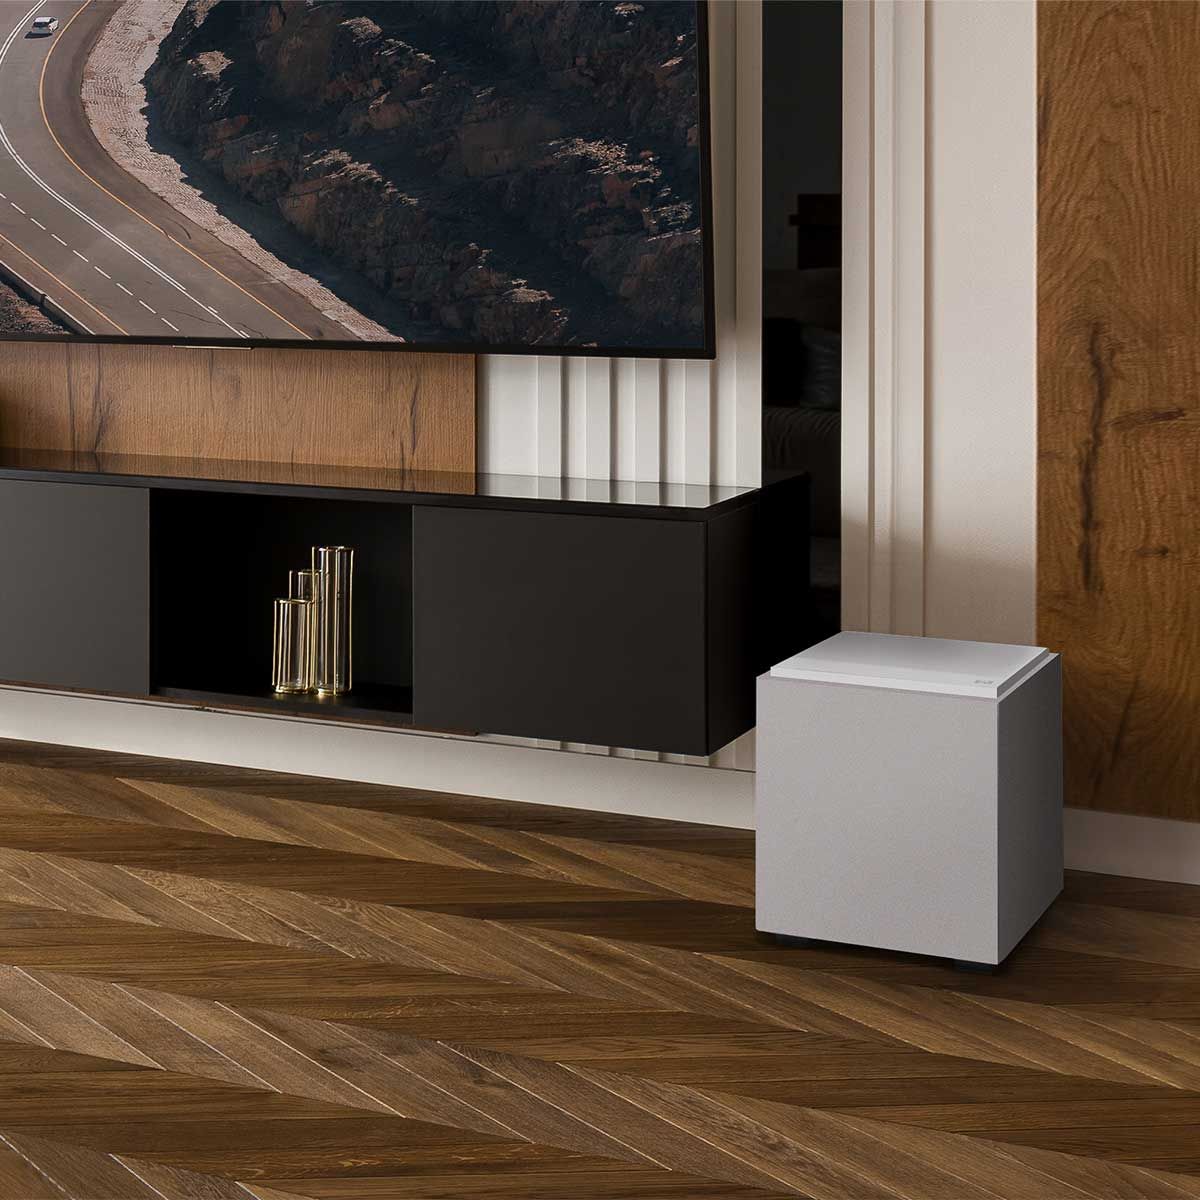 Definitive Technology Descend 8" Subwoofer, Glacier White, set up beneath a black media cabinet and a large television in a wood-paneled living space, at an angle